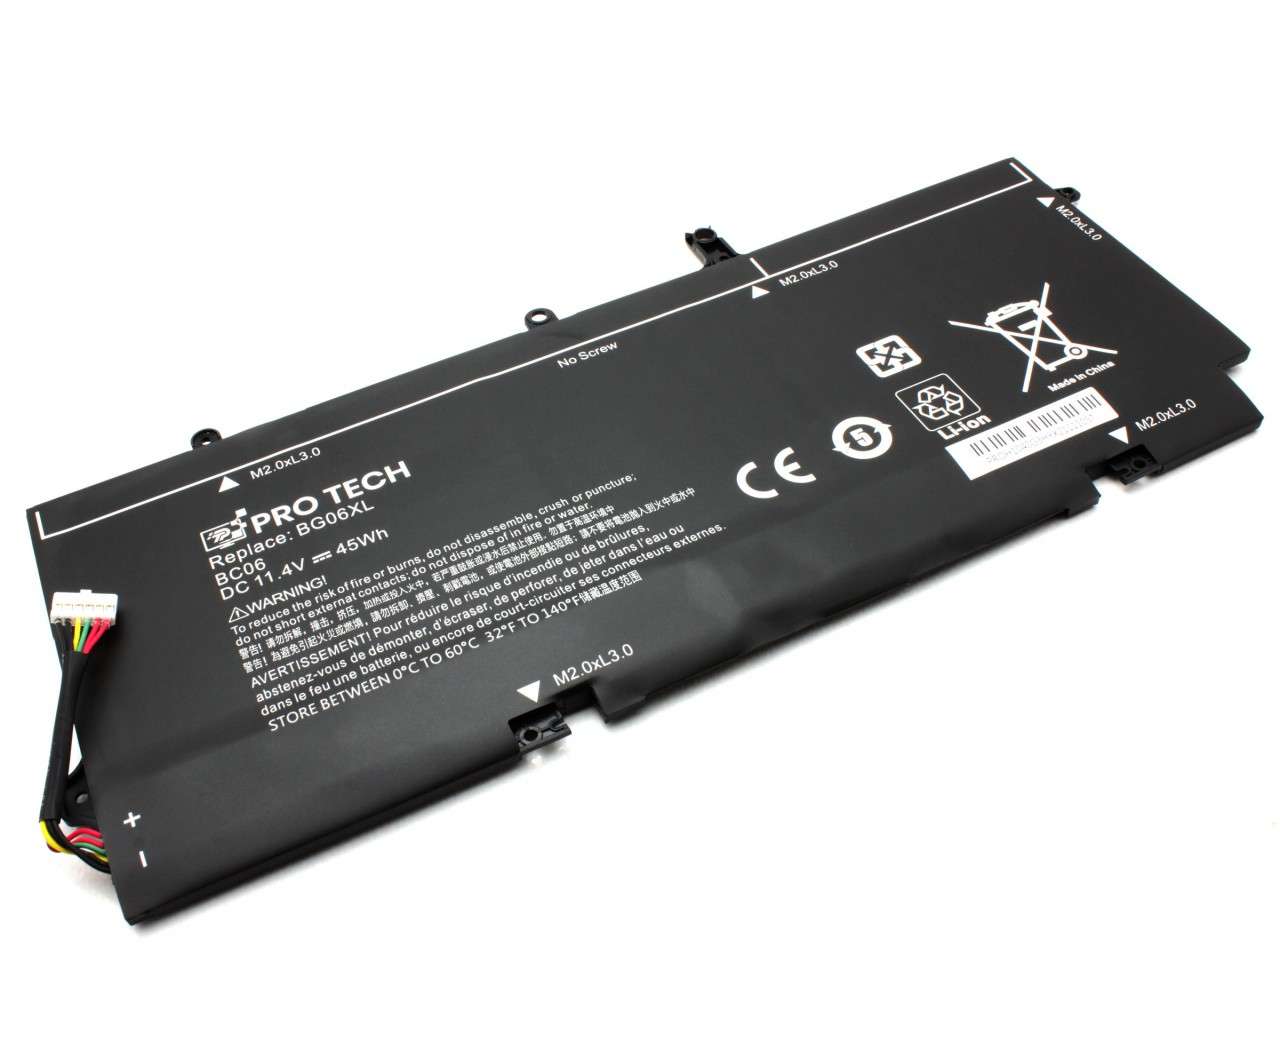 Baterie HP EliteBook 1040 G3 Series Protech High Quality Replacement 1040 imagine noua reconect.ro